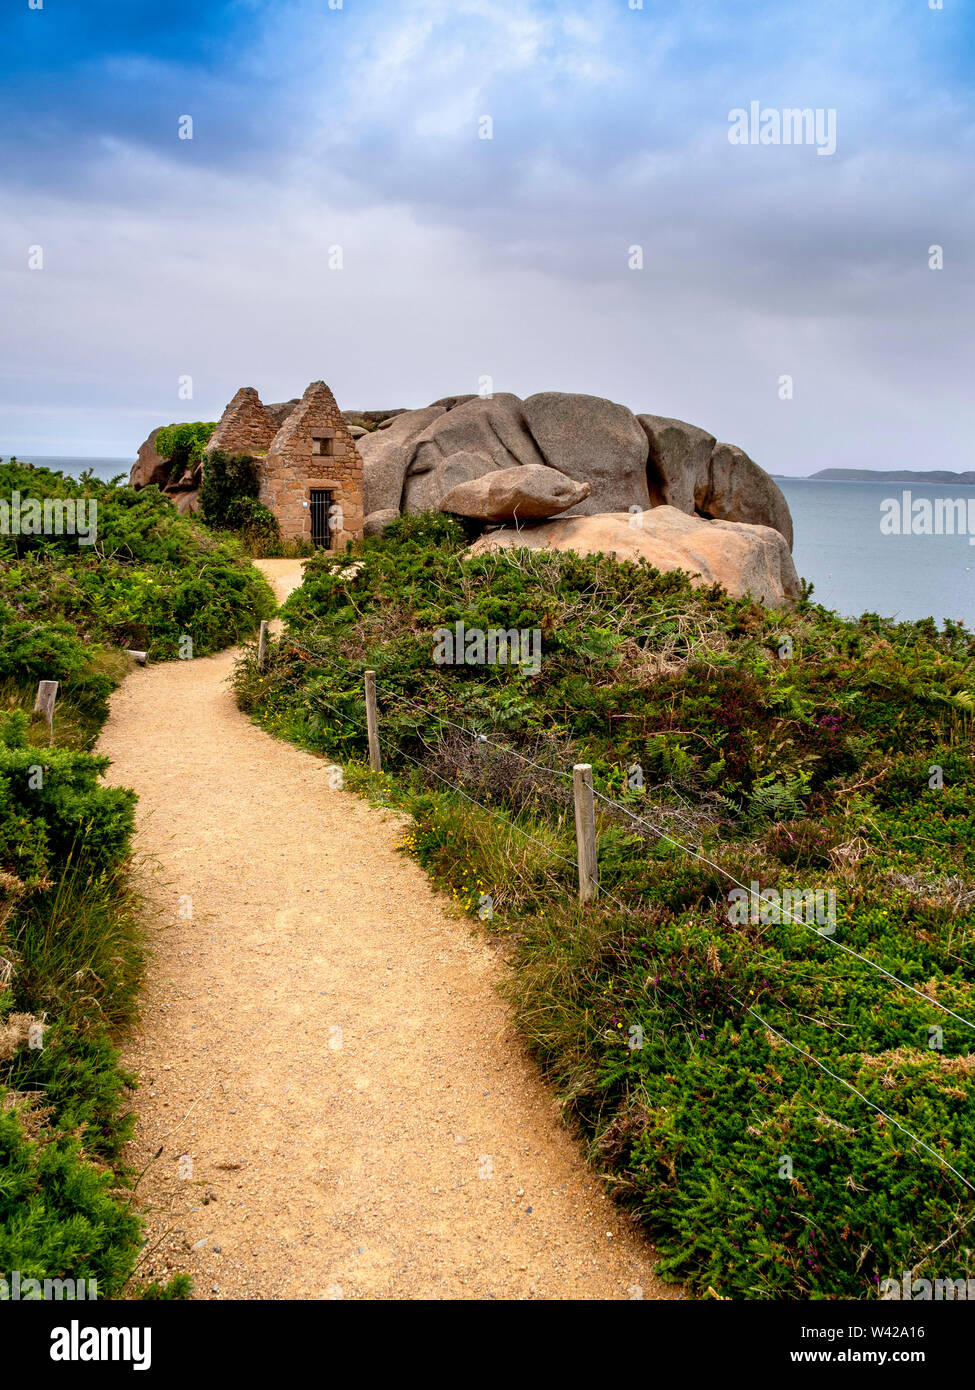 Ploumanach.The old powder house, pink granite coast, Perros Guirec, Cotes d'Armor, France Stock Photo